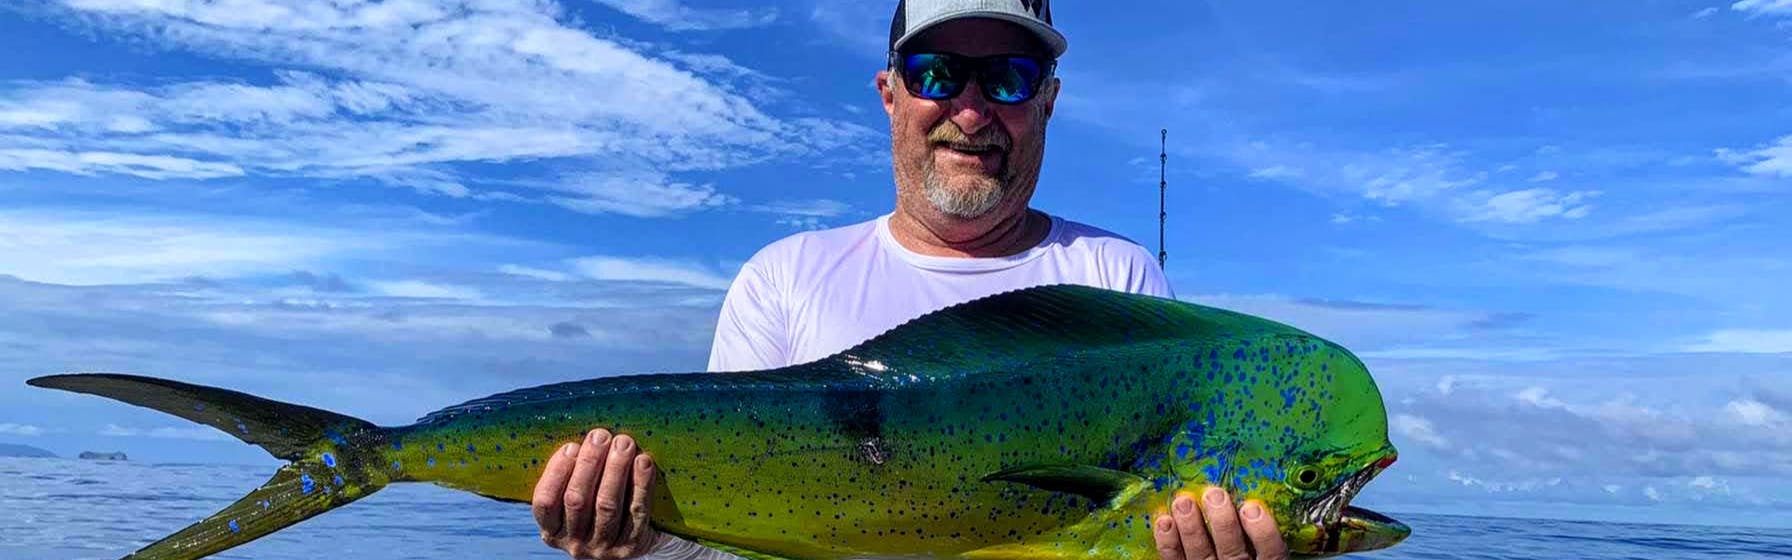 A man with a short white beard, a white t-shirt, a hat, and sunglasses holds up a massive blue, green, and yellow fish while standing on a boat.